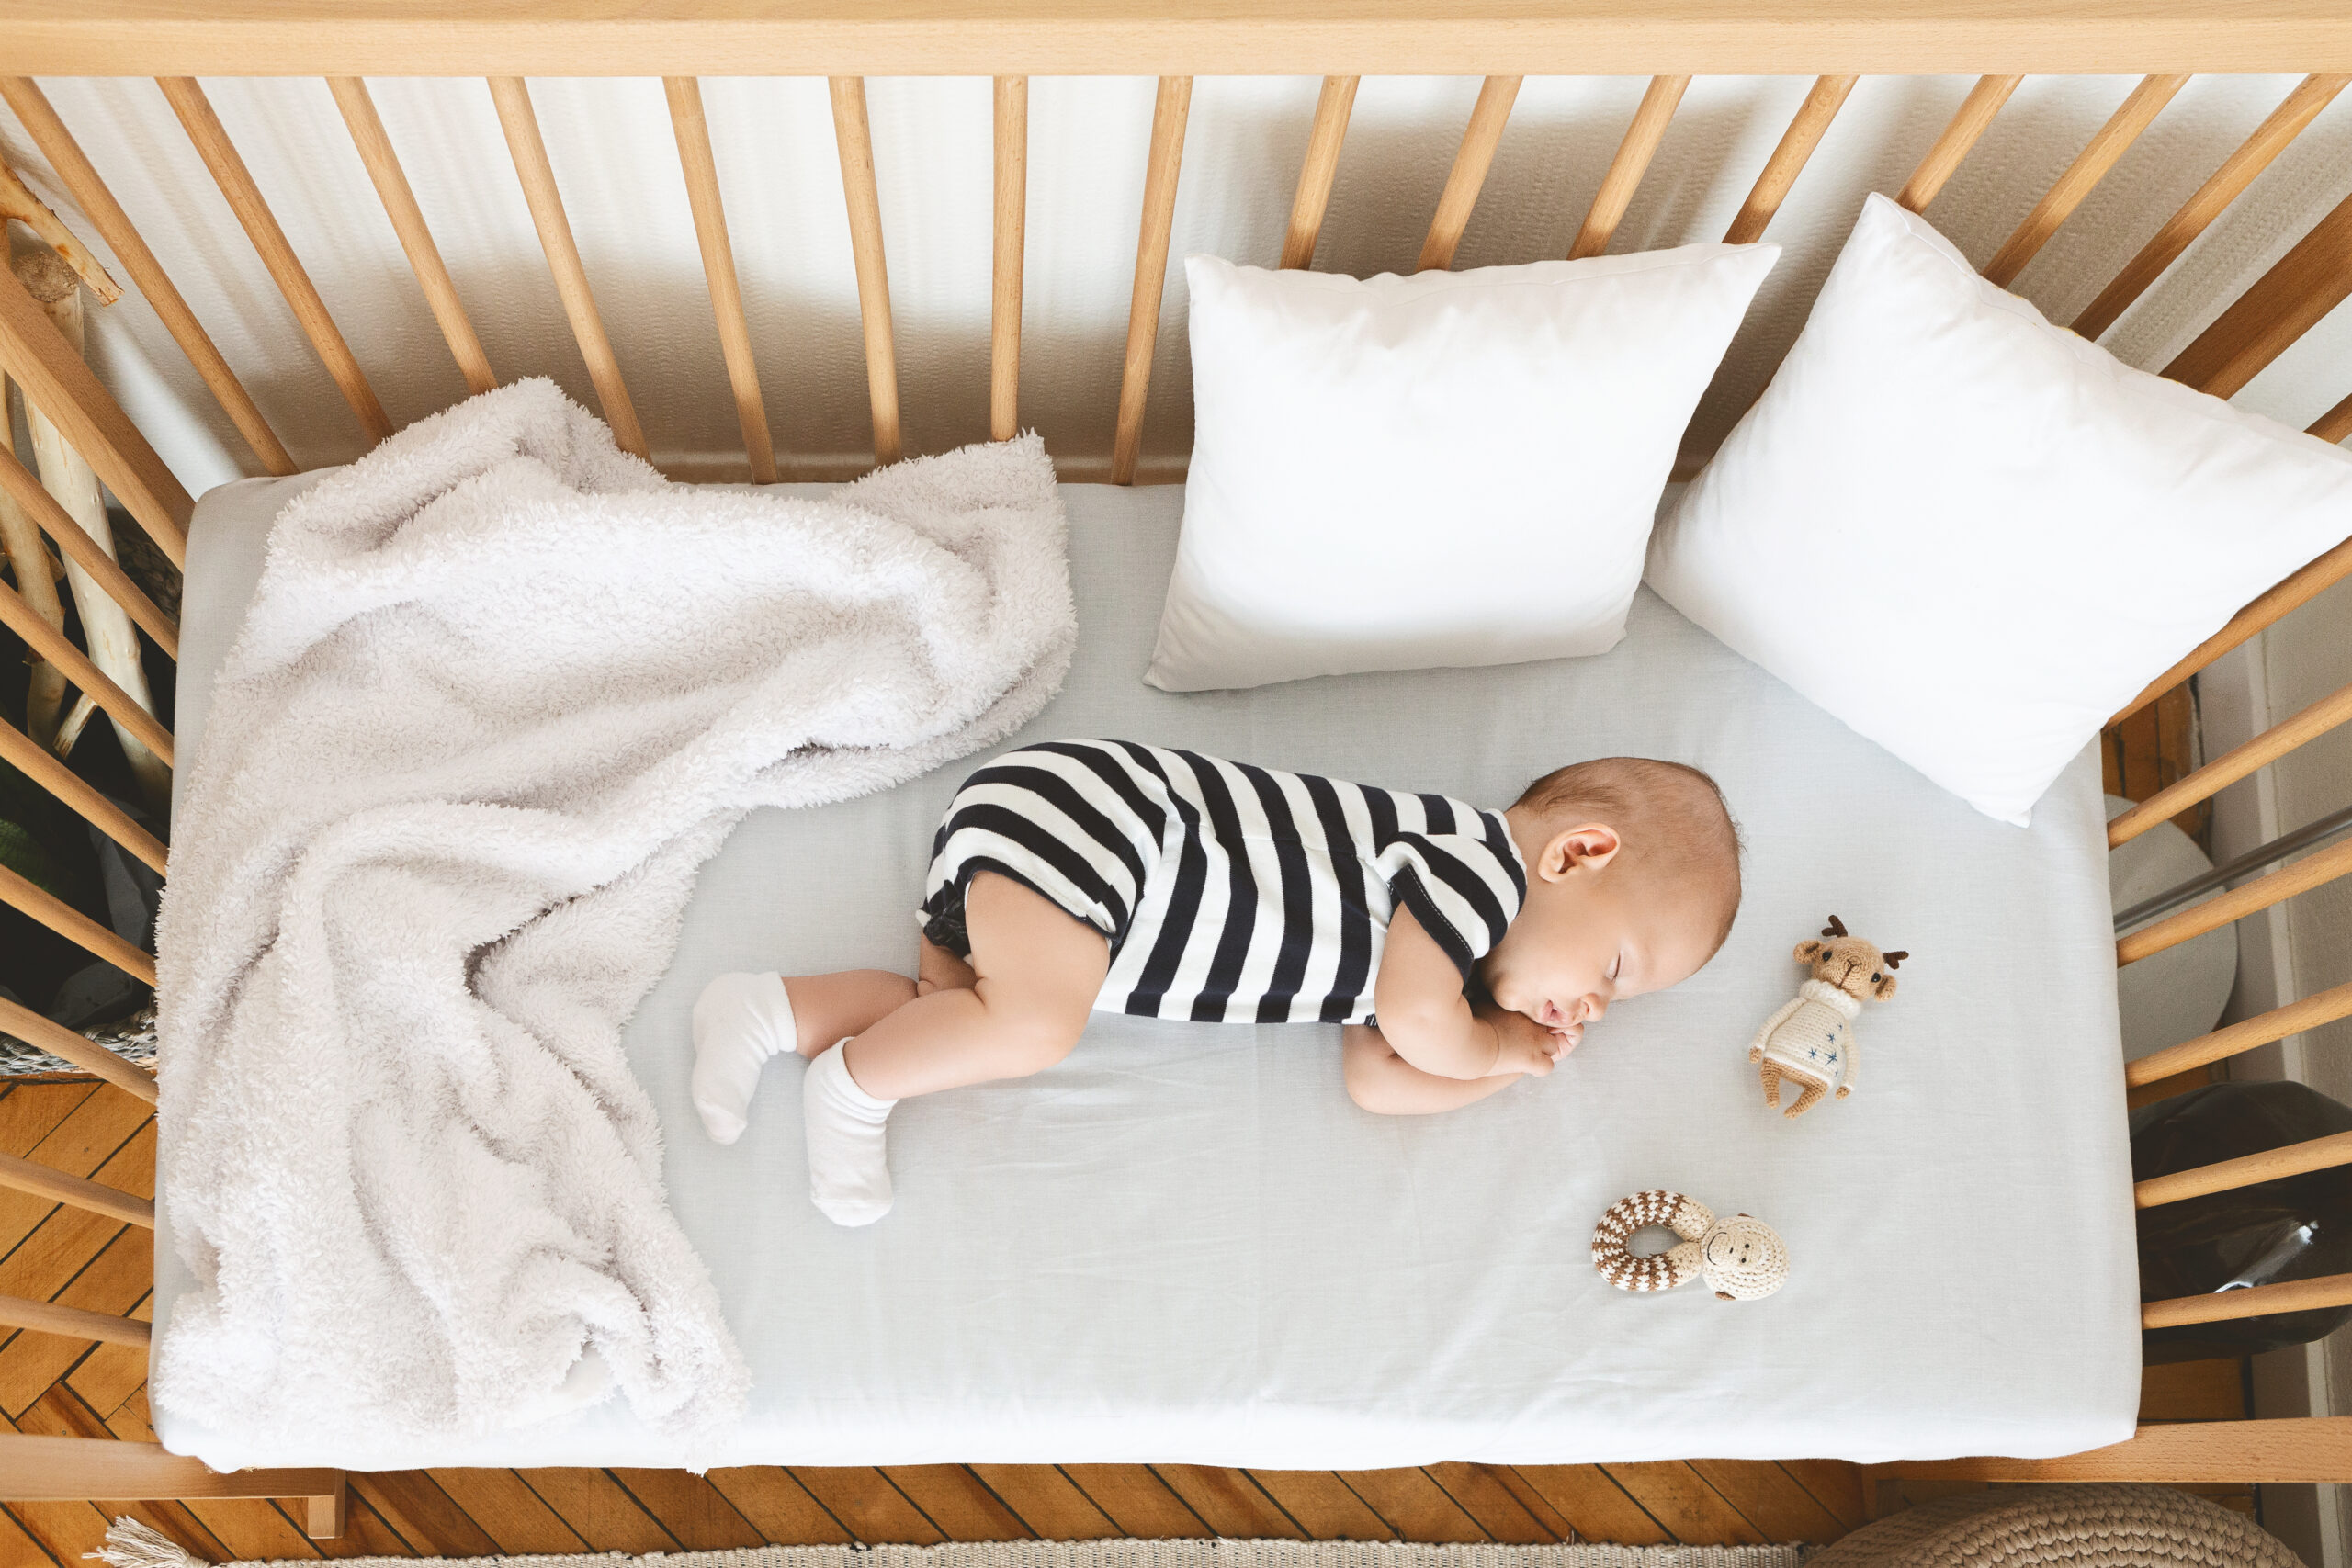 Baby In a Cot